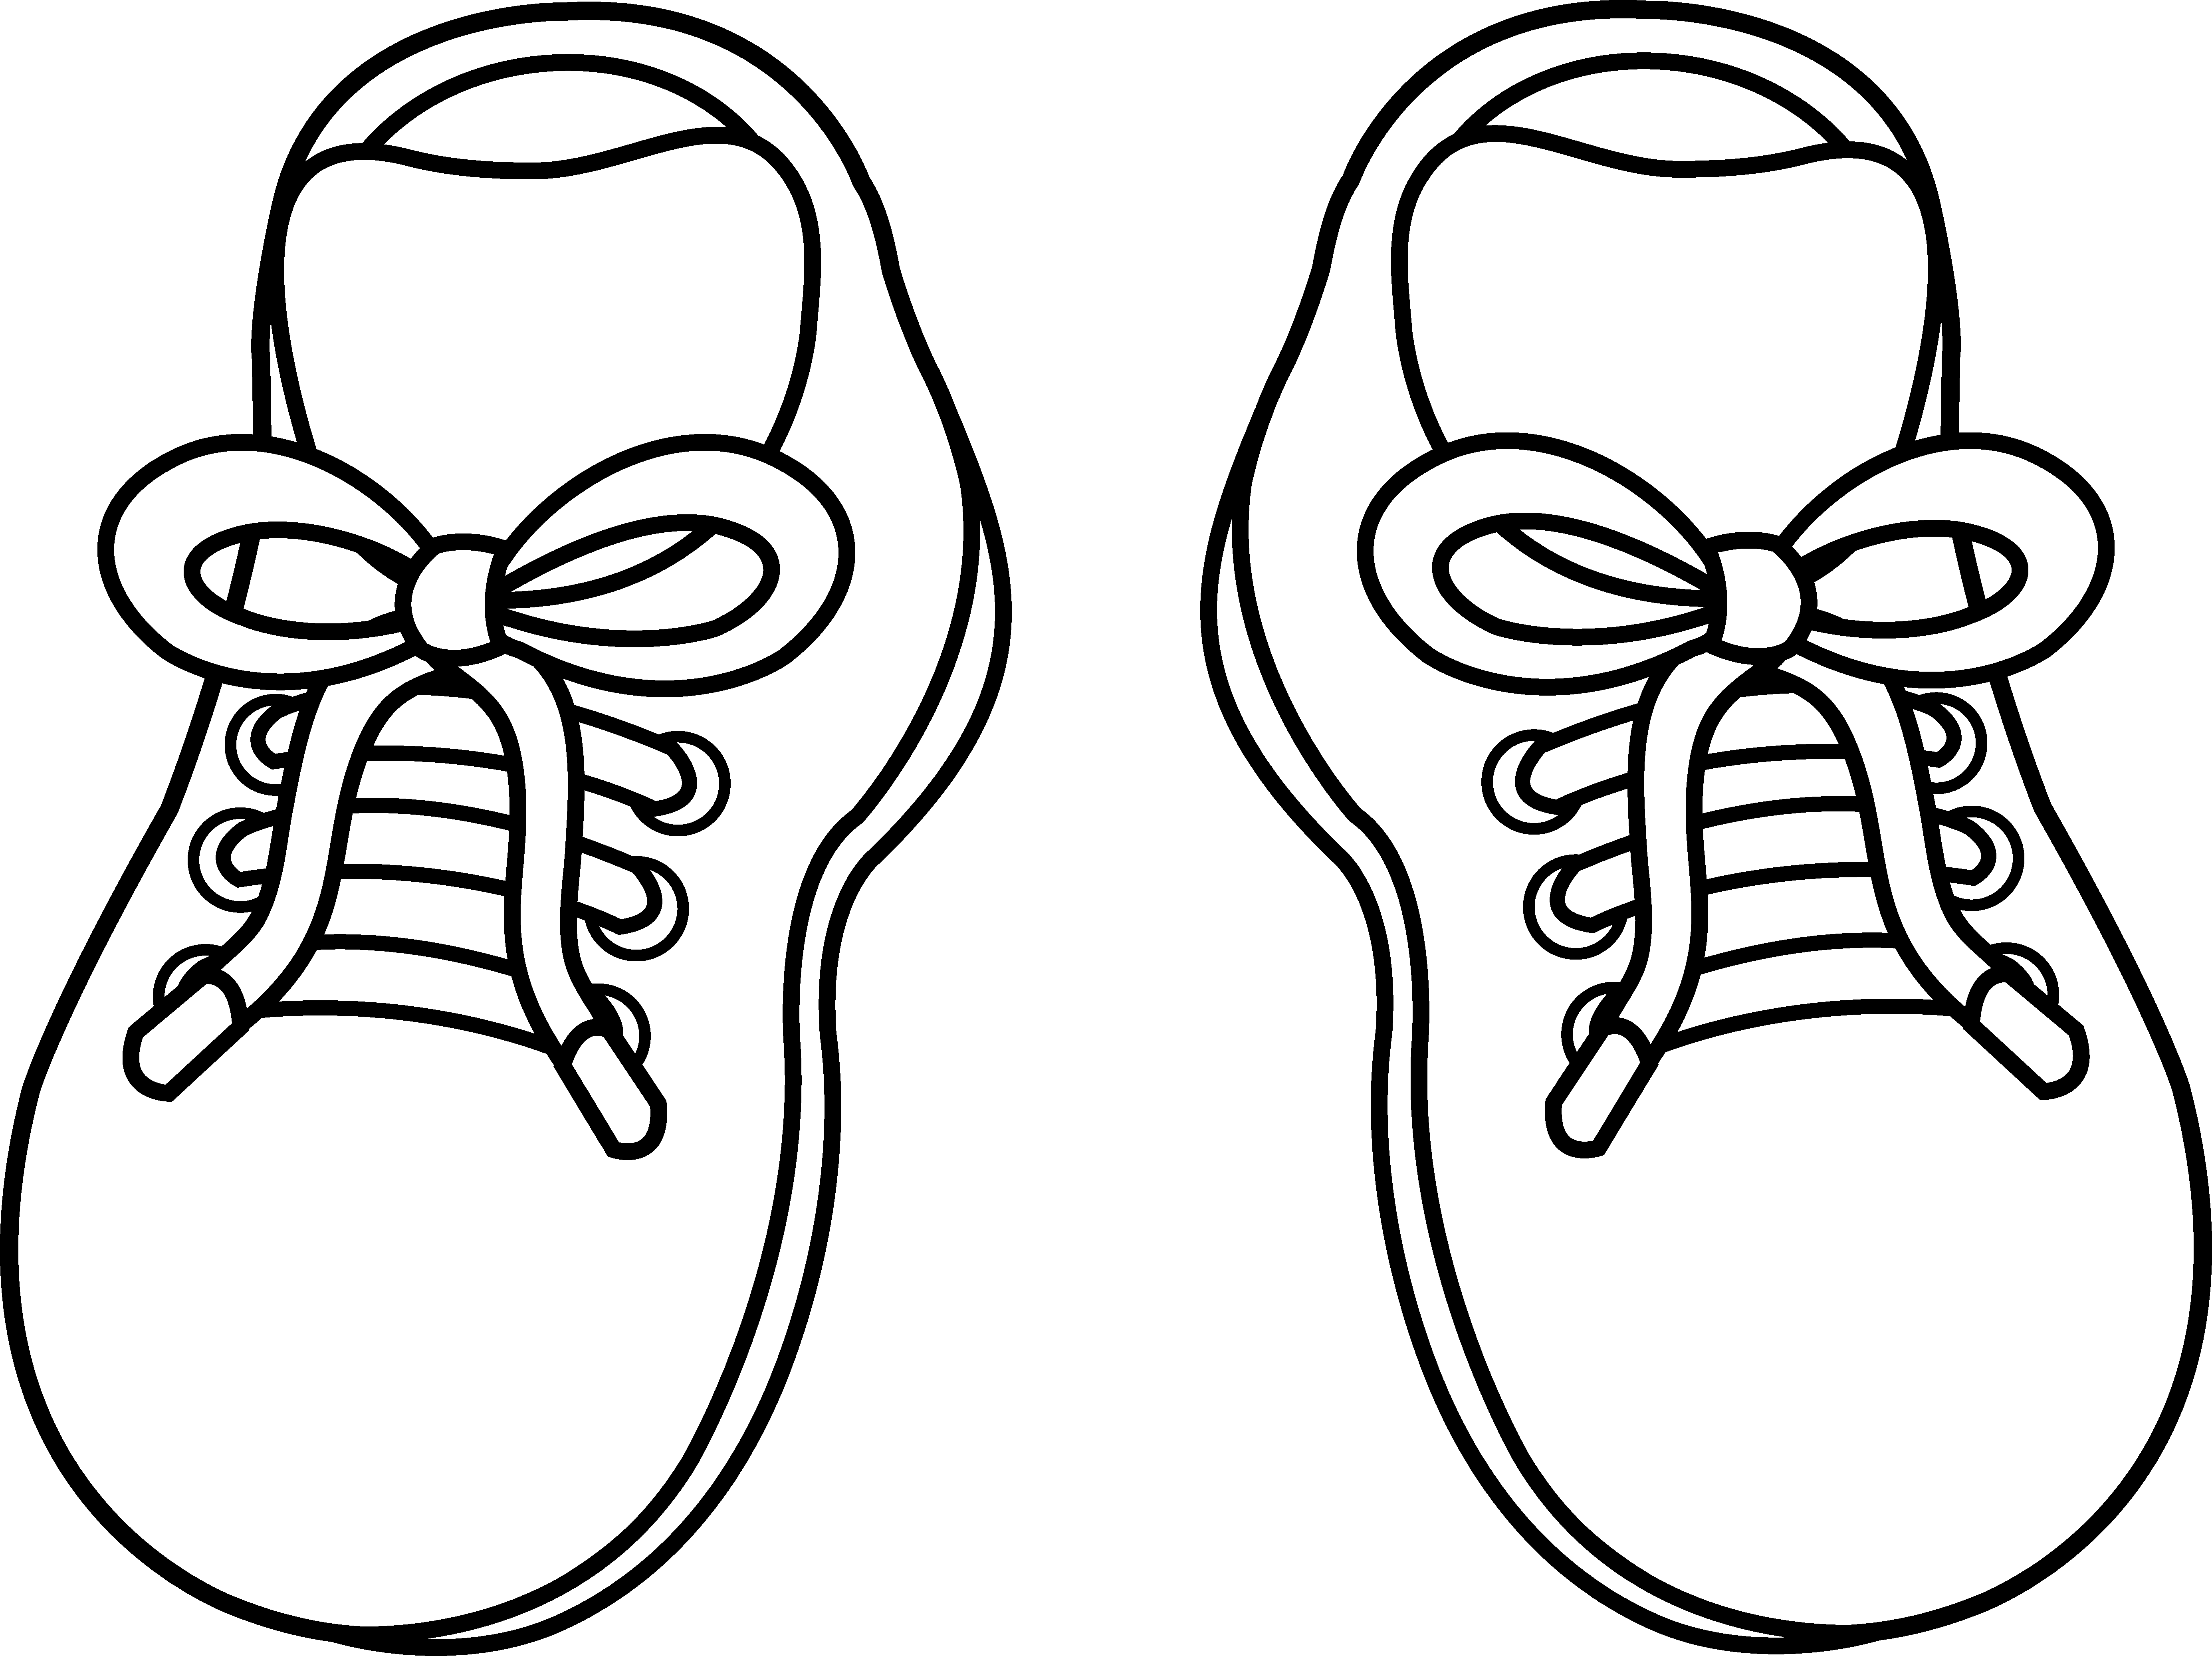 Cup clipart colouring page.  collection of shoe